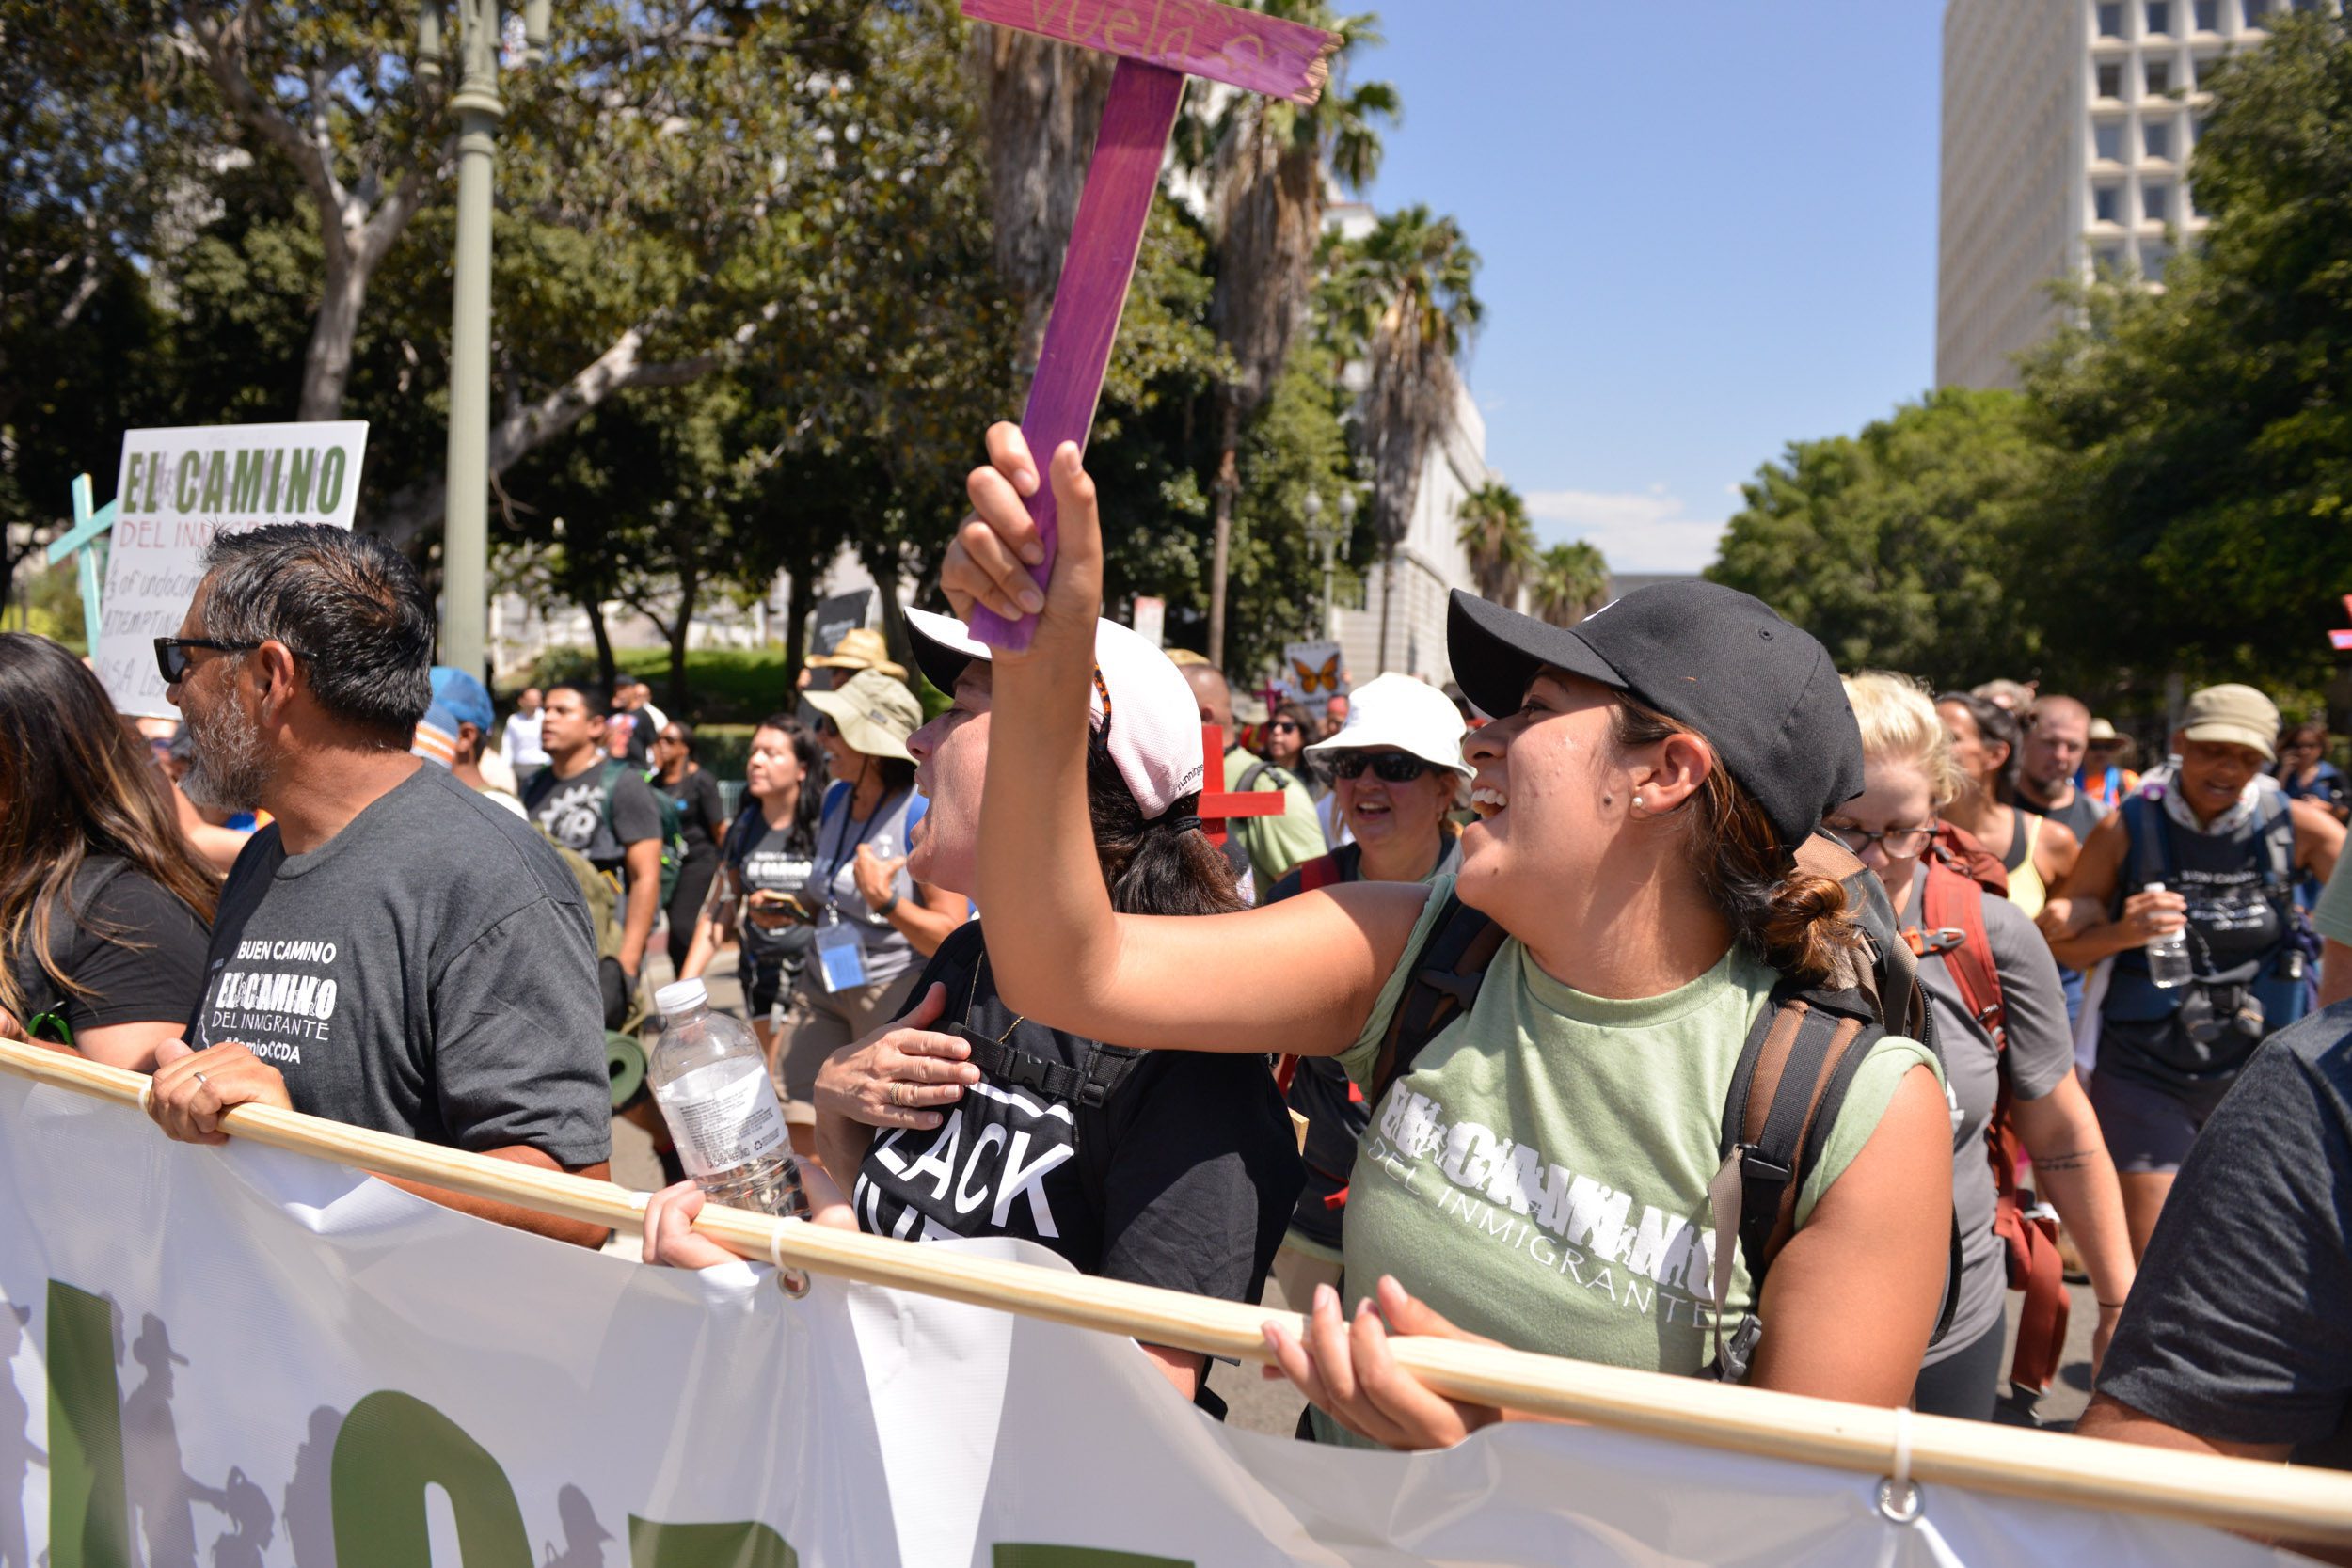 Participants of the El Camino, a 150-mile walk to draw attention to immigration crisis in the United States, attend a rally at the Detention Center in downtown Los Angeles, Calif. Buddy Bleckley for Bread for the World